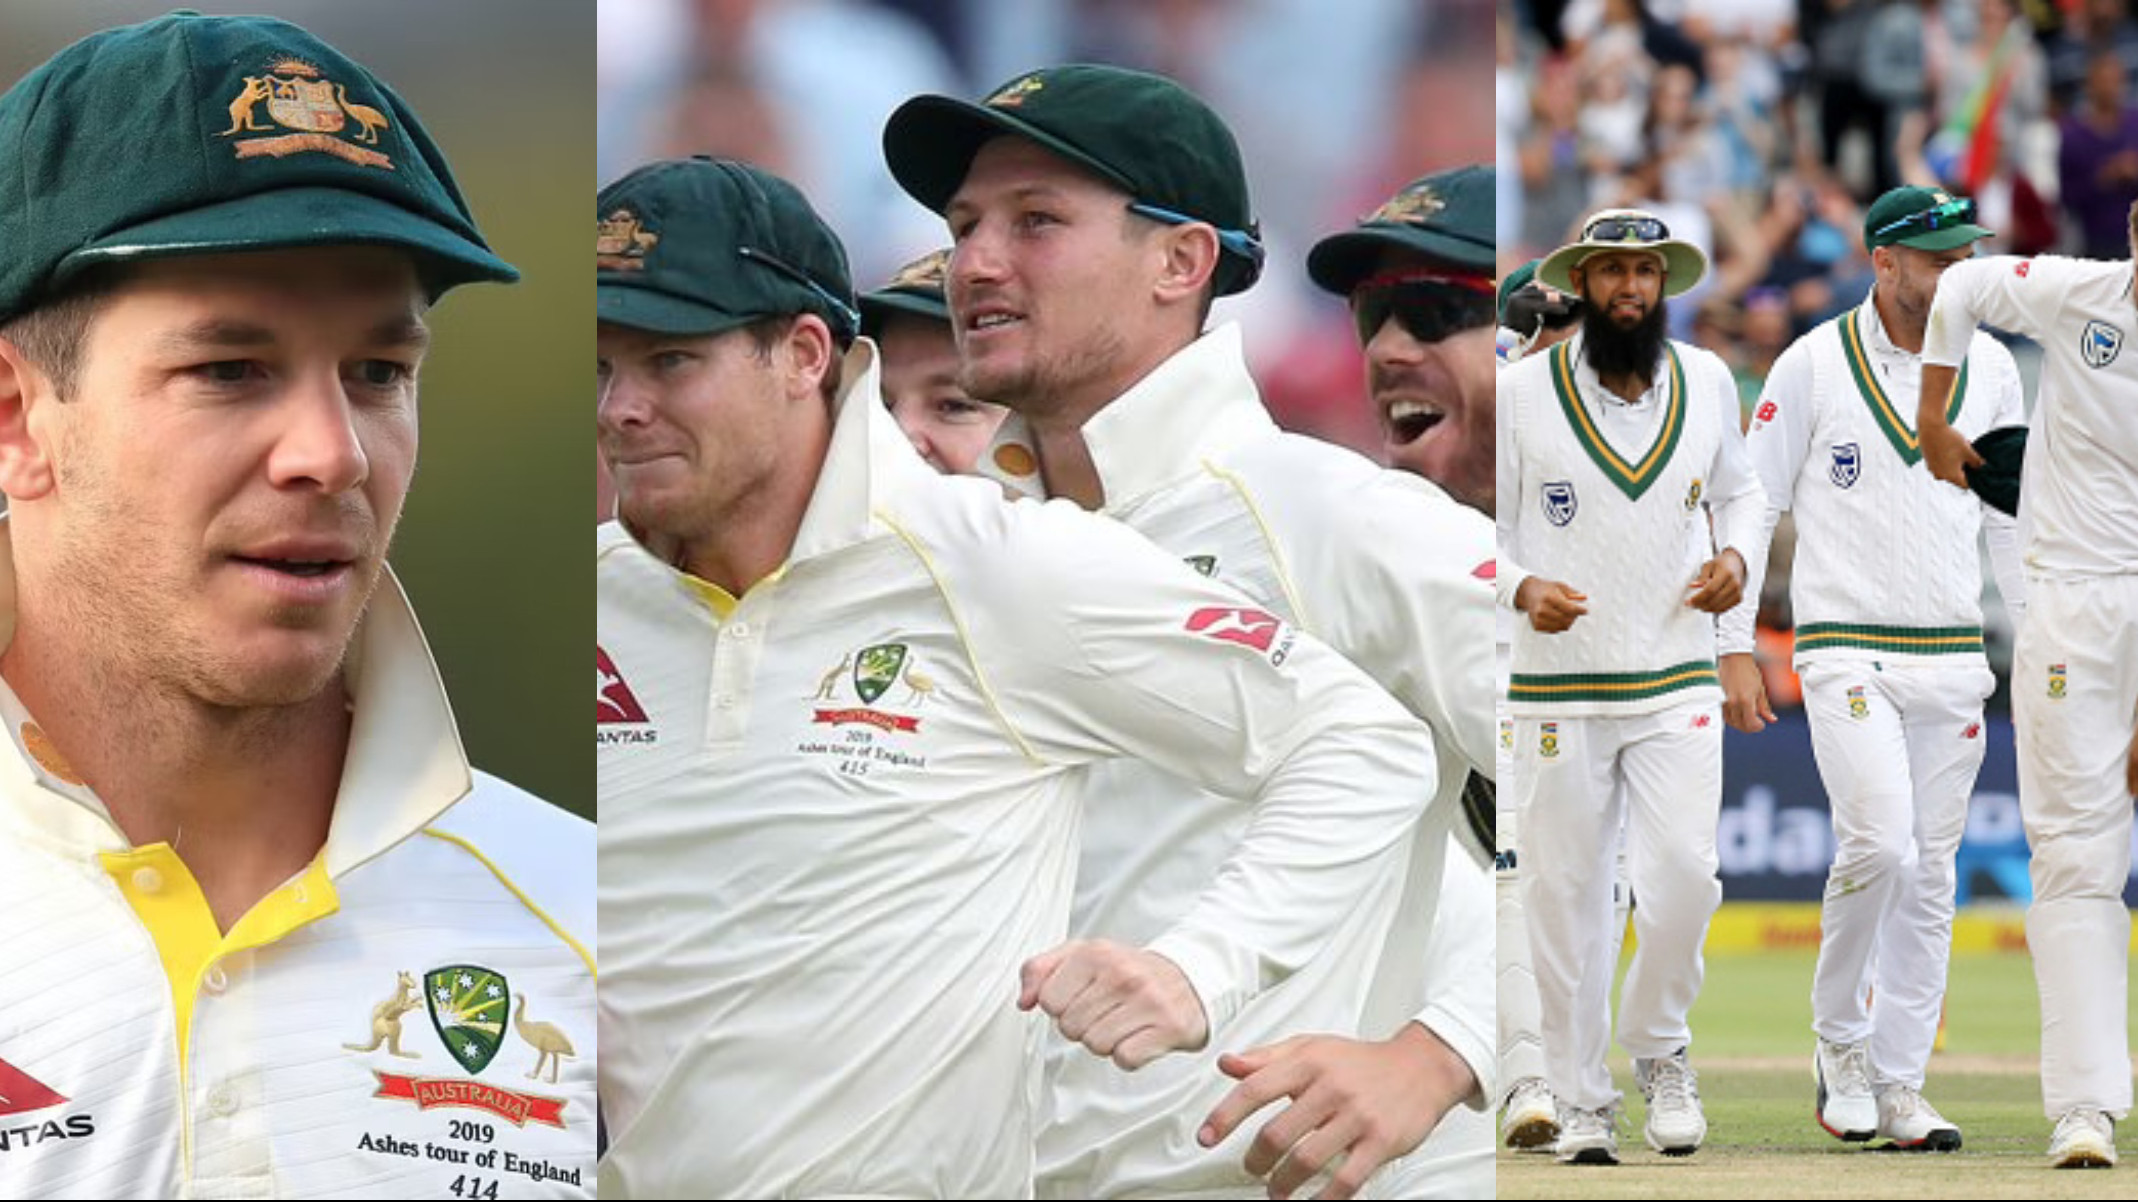 Tim Paine accuses South Africa of ball tampering in 2018 after the Cape Town Test saga in his book